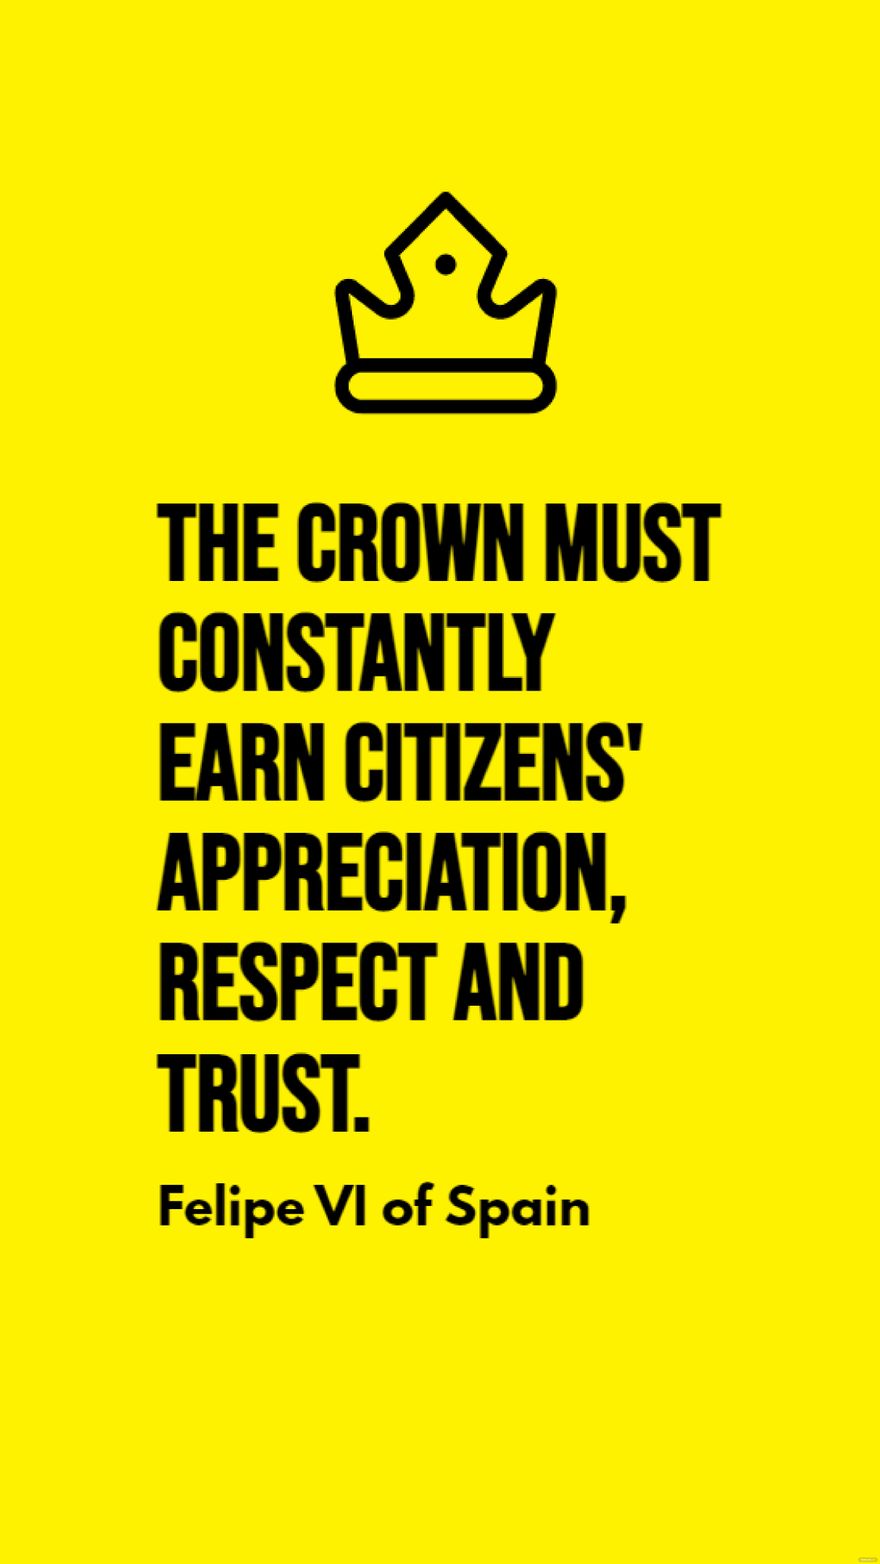 Felipe VI of Spain - The crown must constantly earn citizens' appreciation, respect and trust. in JPG